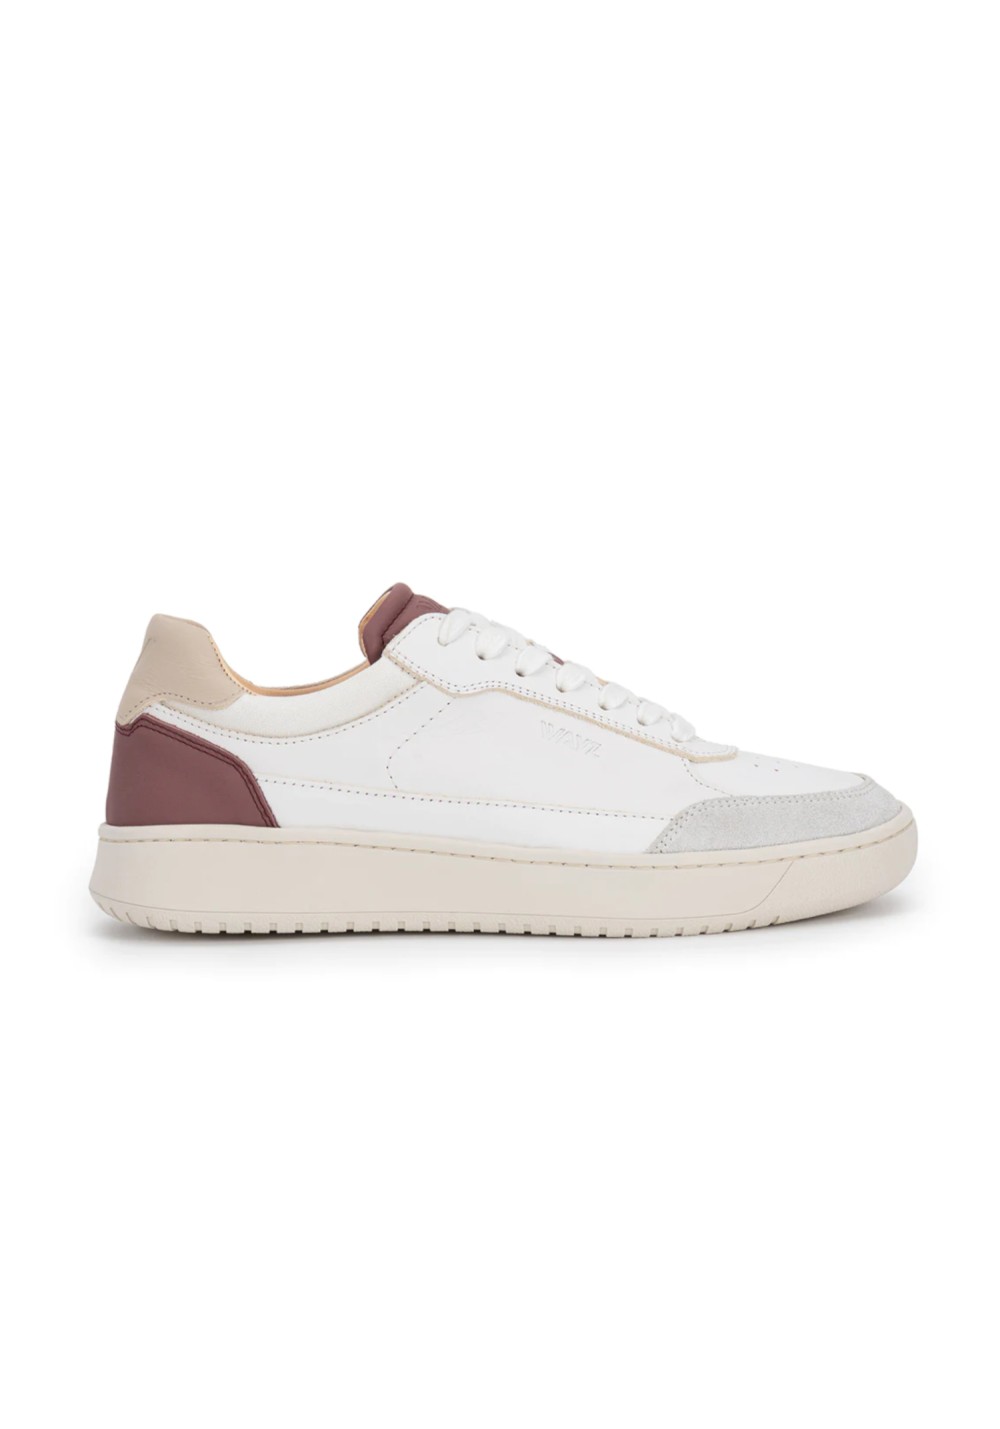 Wayz - Sneaker The Hedonist White Grey Double Dry Rose